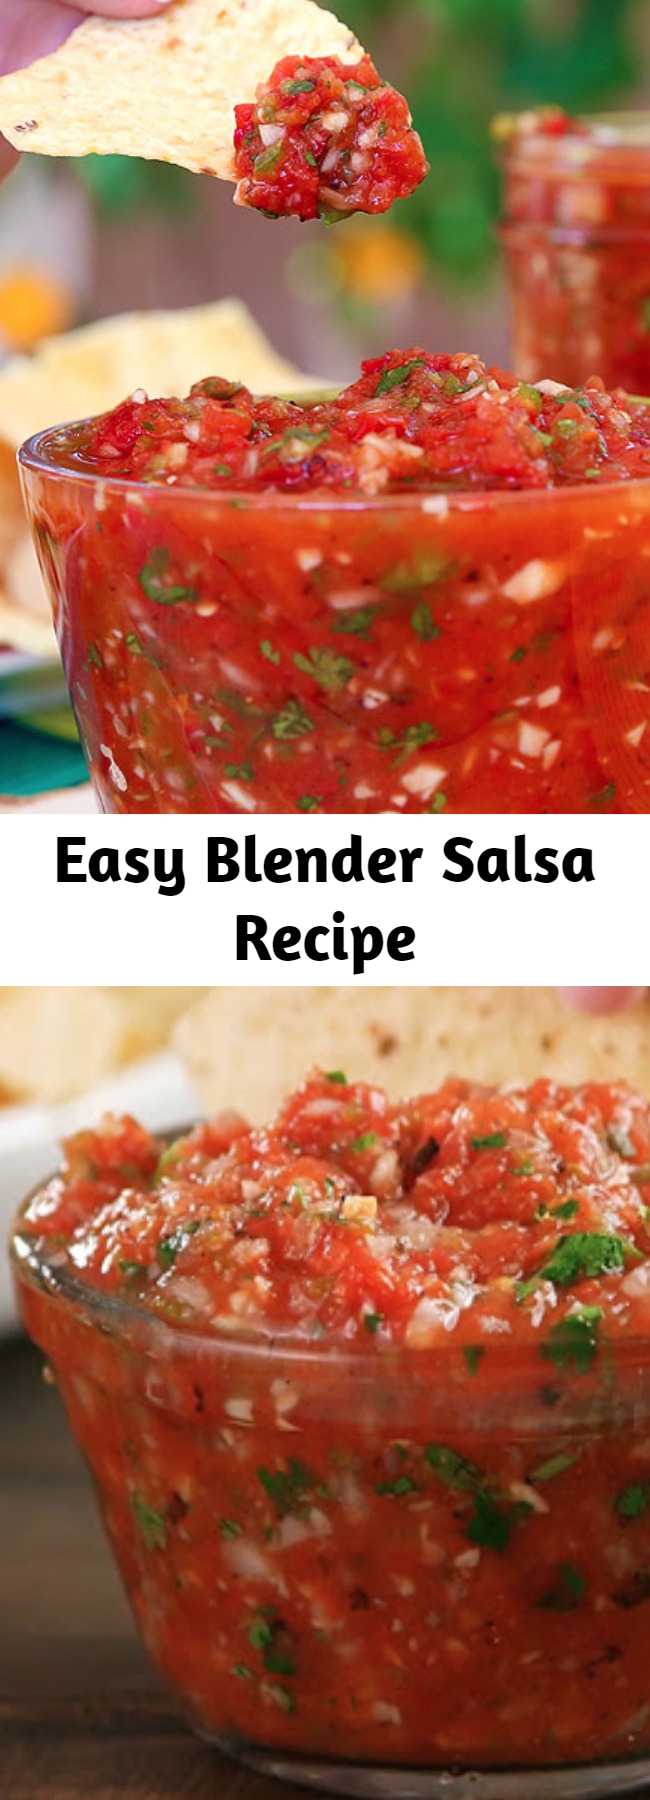 Easy Blender Salsa Recipe - This perfectly scoopable Lazy Day Salsa is a classic tomato salsa that is whipped up in a flash (no chopping required). It is speckled with bits of onion, garlic, and cilantro for an extra freshness. This salsa is so easy you can make it in 10 minutes (it takes me 5) . The best part is, you can add it to left over chicken, burgers, casseroles and viola you have the perfect left over dinner. #salsa #appetizer